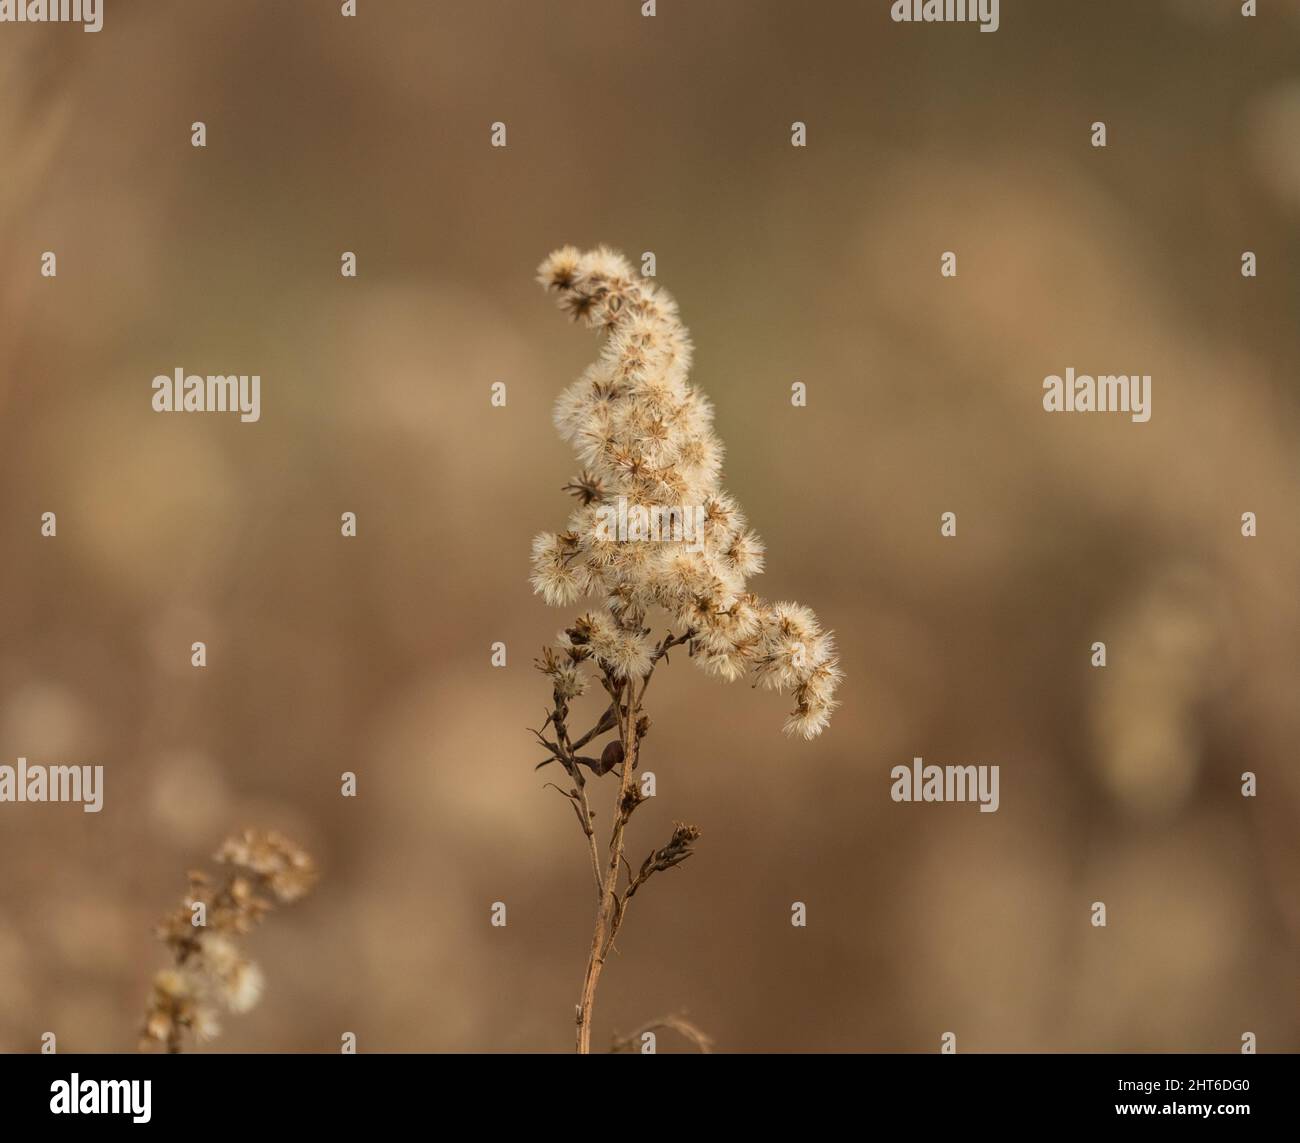 A closeup of the dry flower against the brown background. Shallow focus. Stock Photo